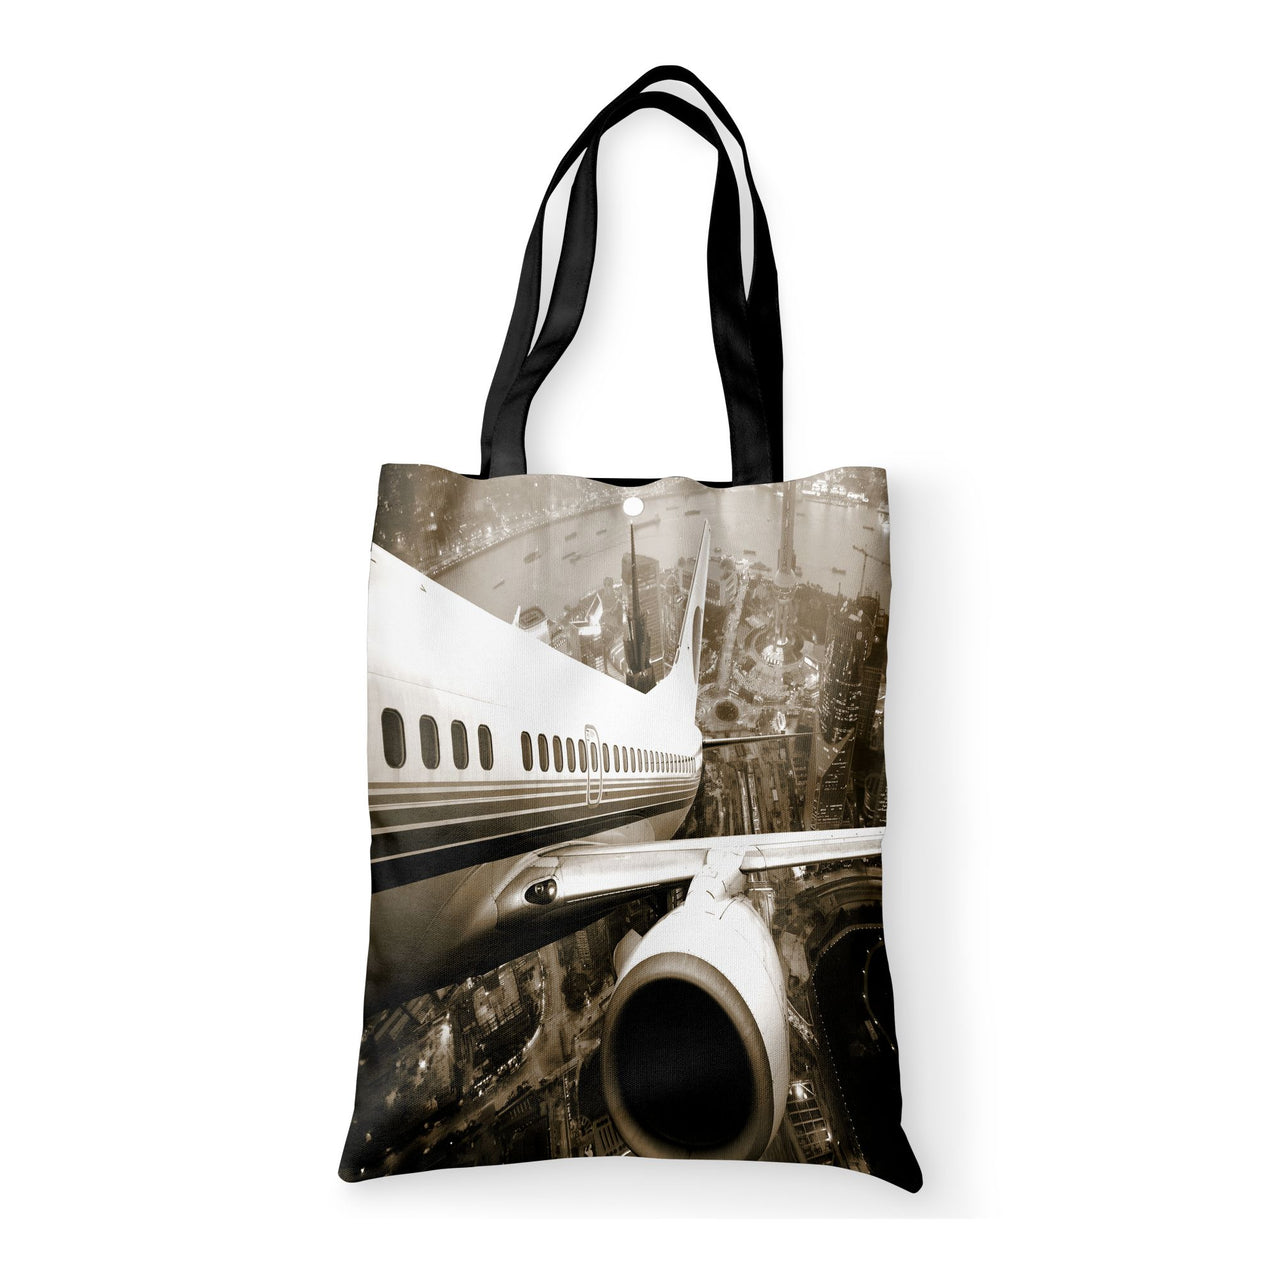 Departing Aircraft & City Scene behind Designed Tote Bags